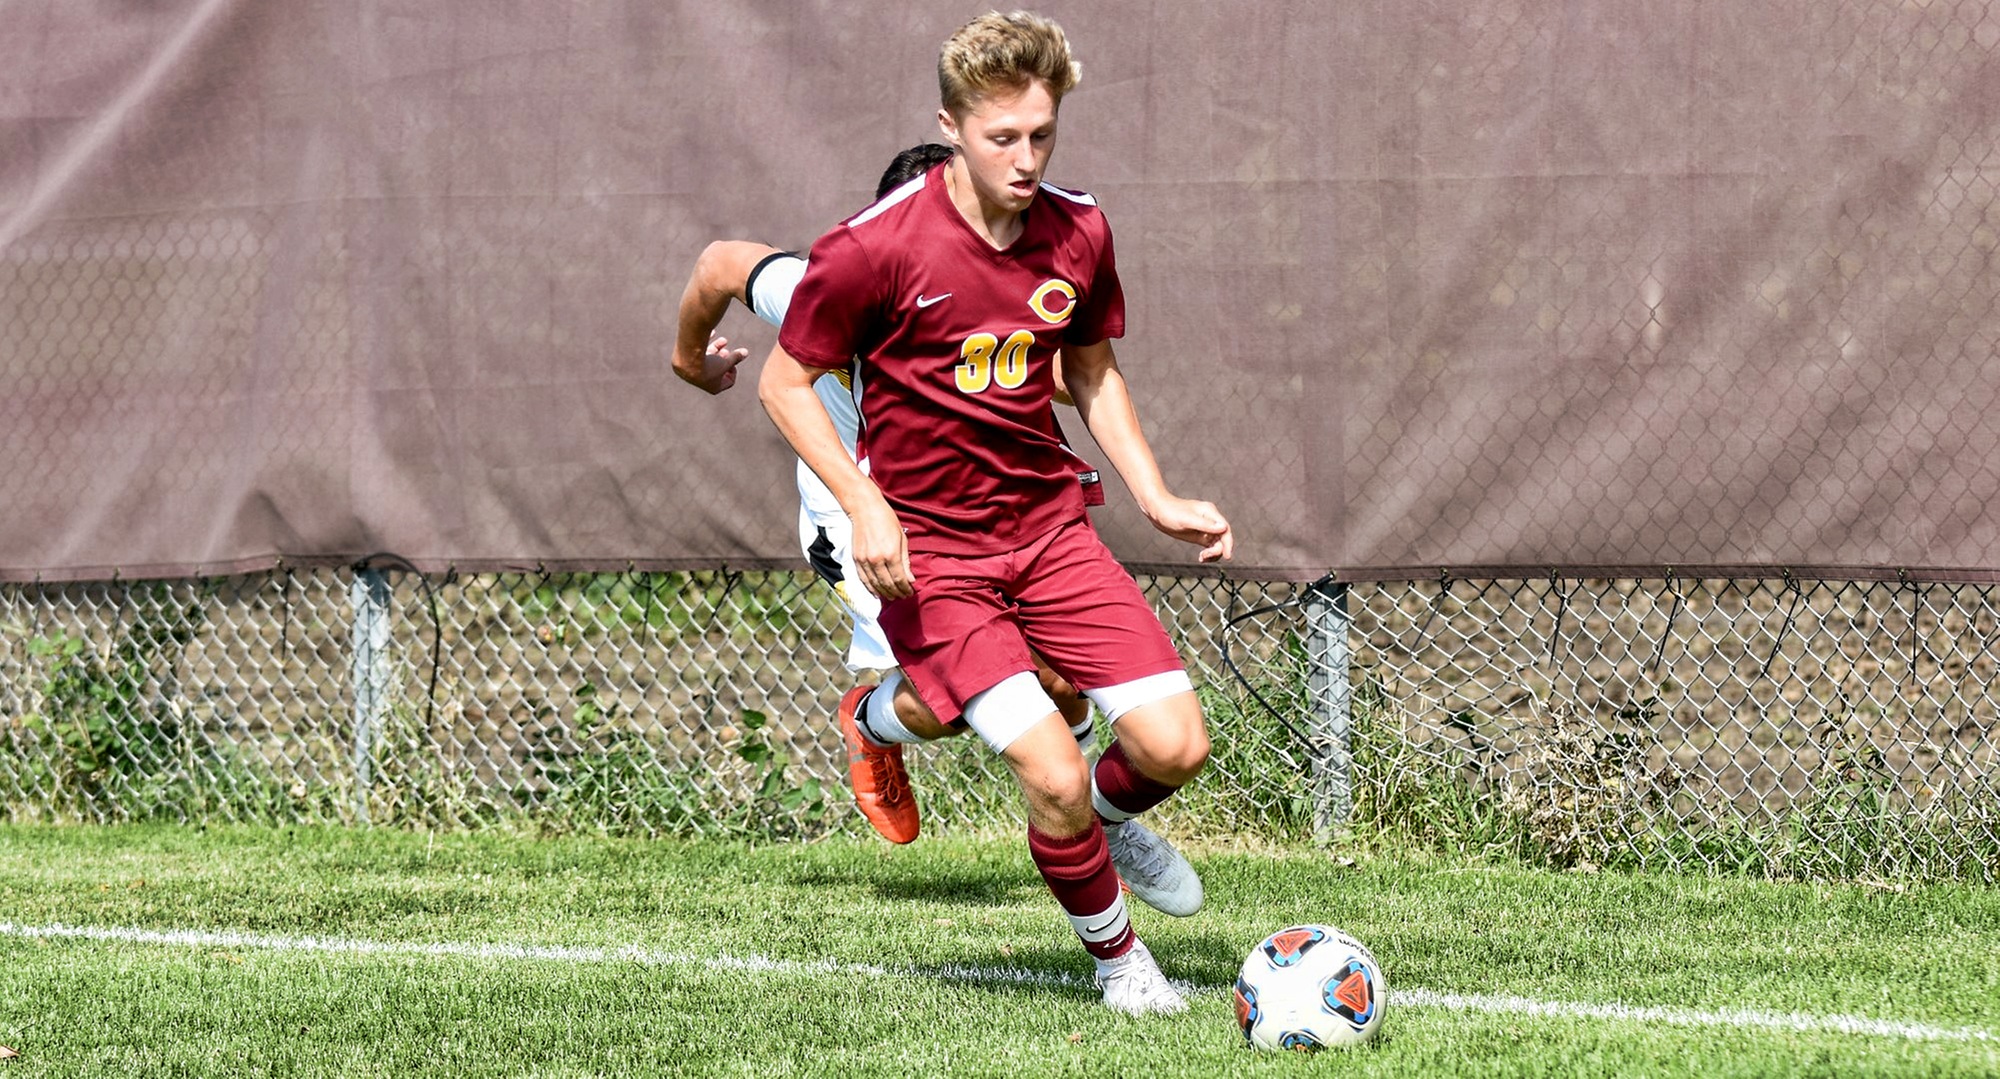 Freshman TJ Anderson scored a pair of goals, including the game winner, in the Cobbers' 4-2 win at Viterbo.